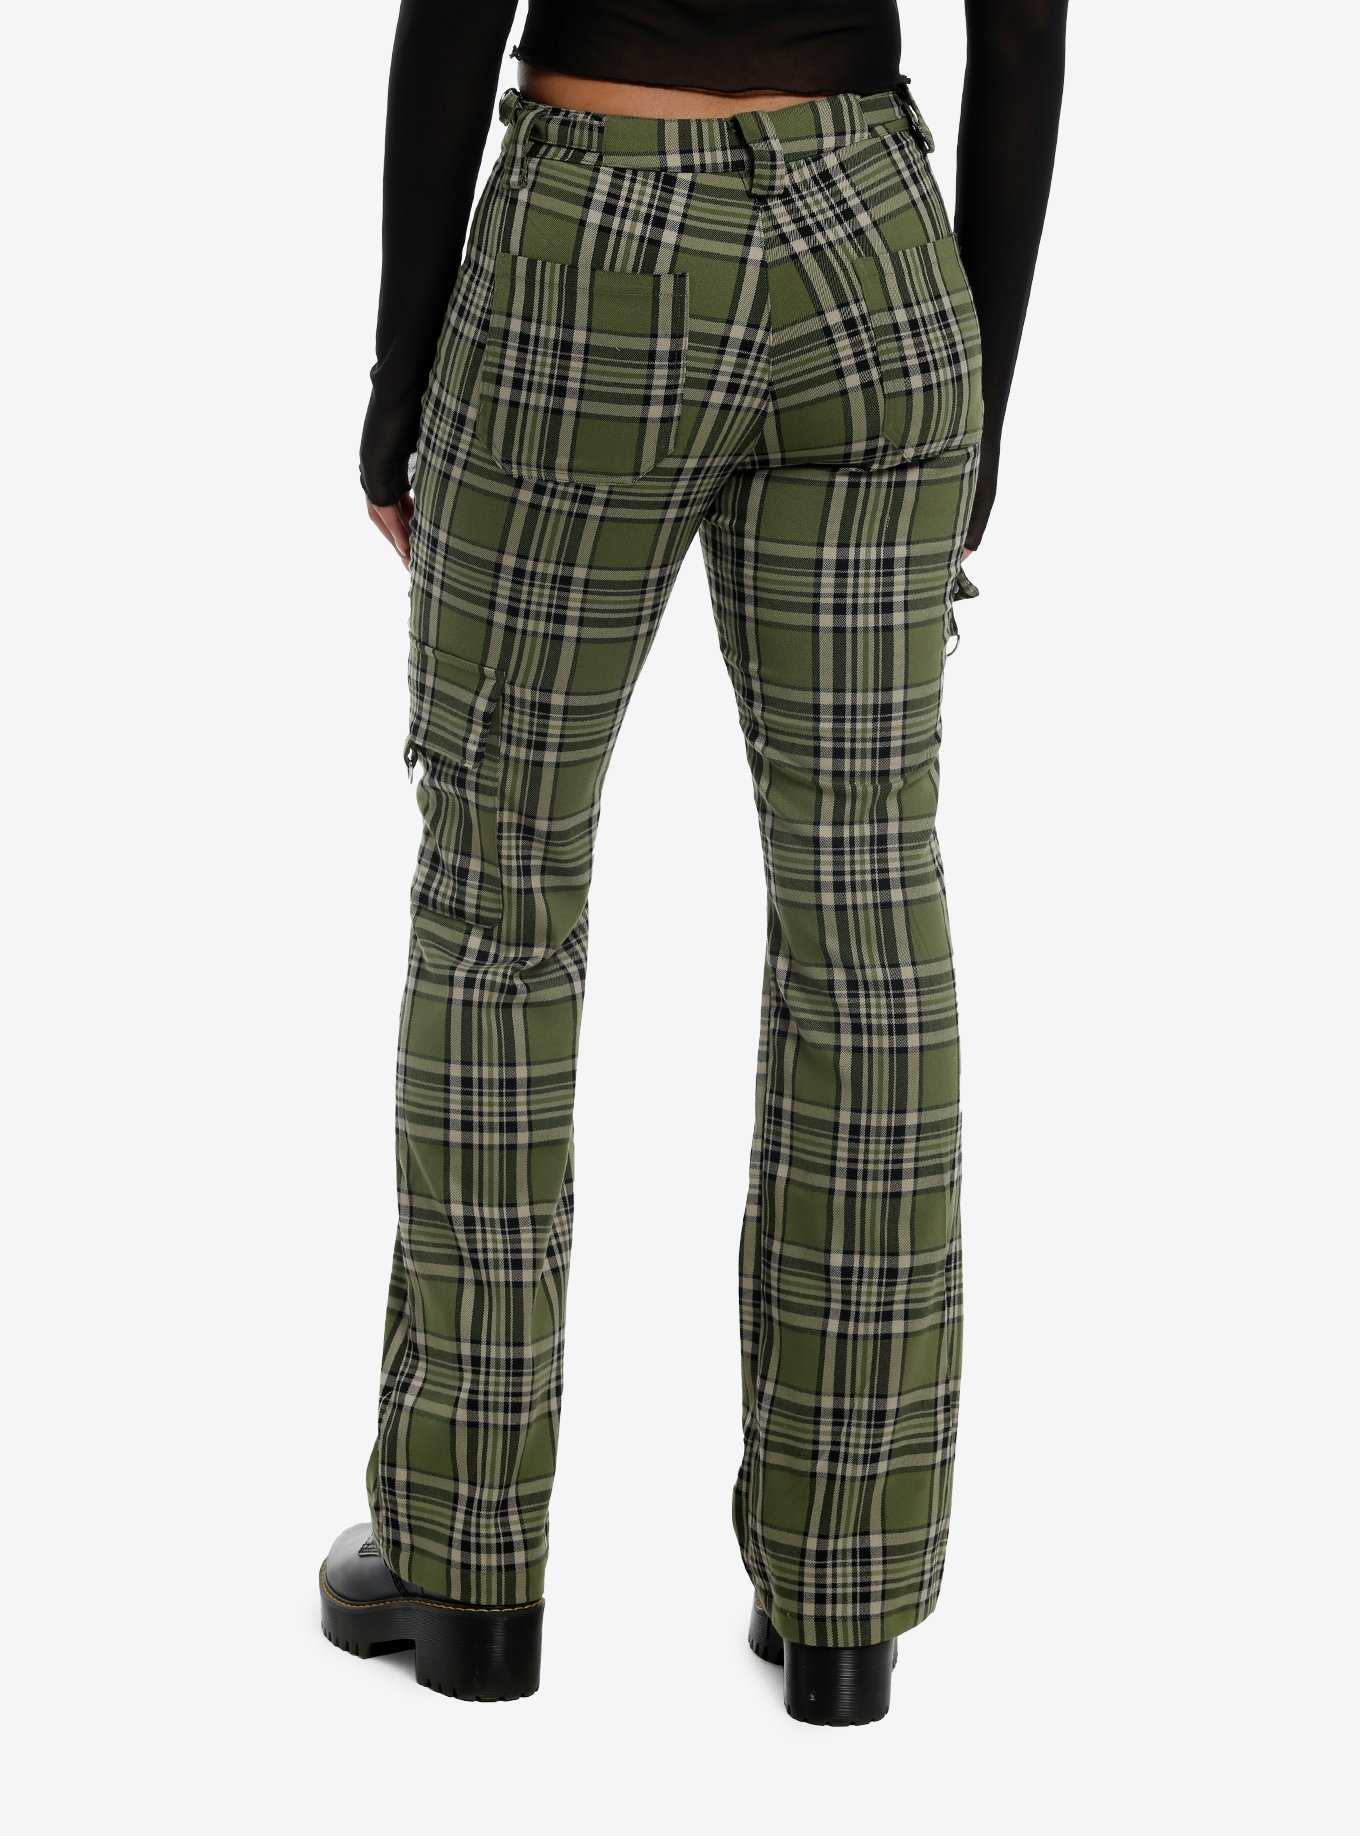 Thorn & Fable Green Plaid Hardware Girls Flare Pants, , hi-res